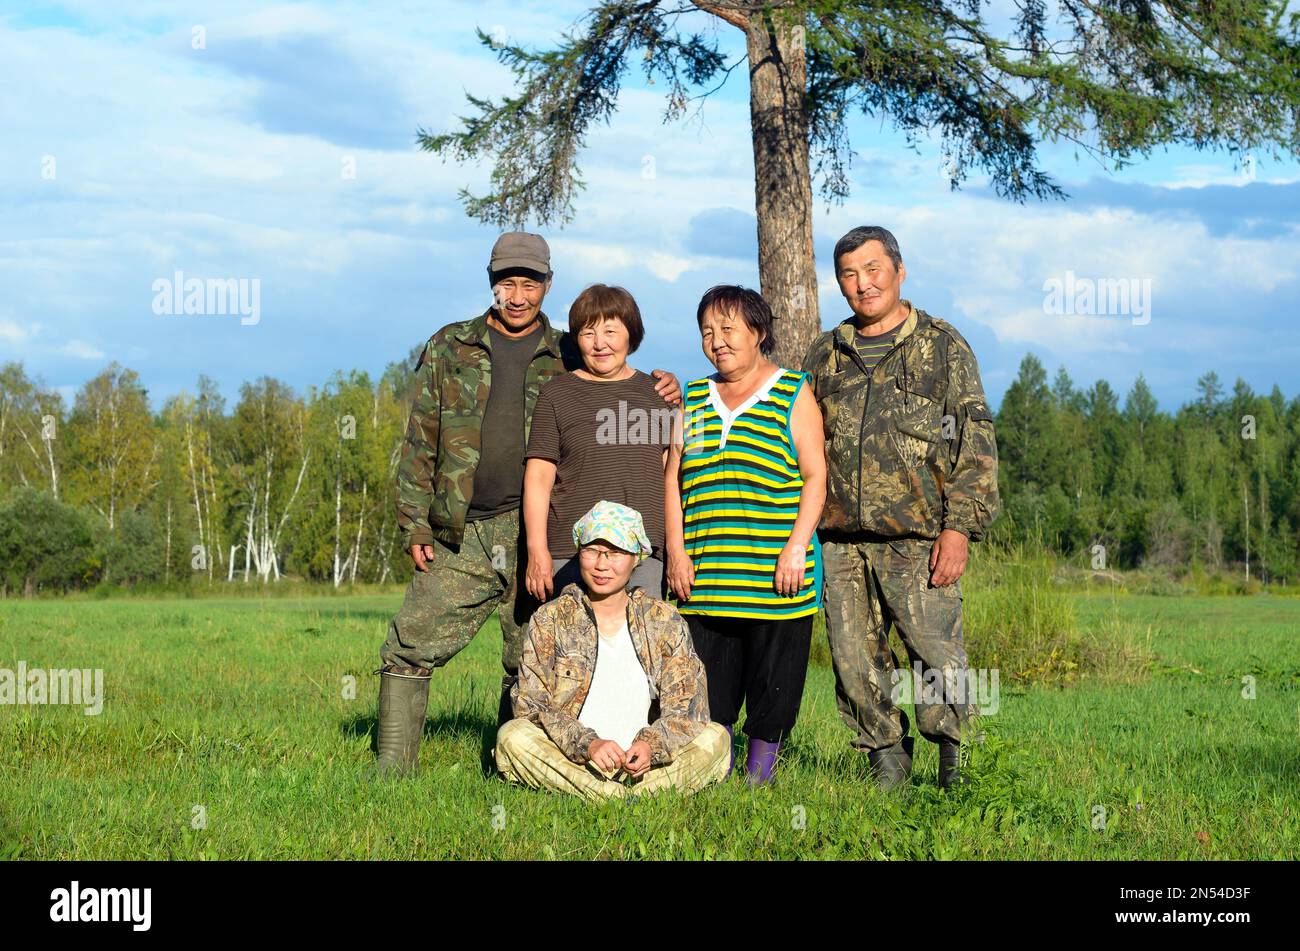 Two Yakut Asian elderly couples men and women with a young girl sitting on the grass pose for a family photo in a field near a tree. Stock Photo